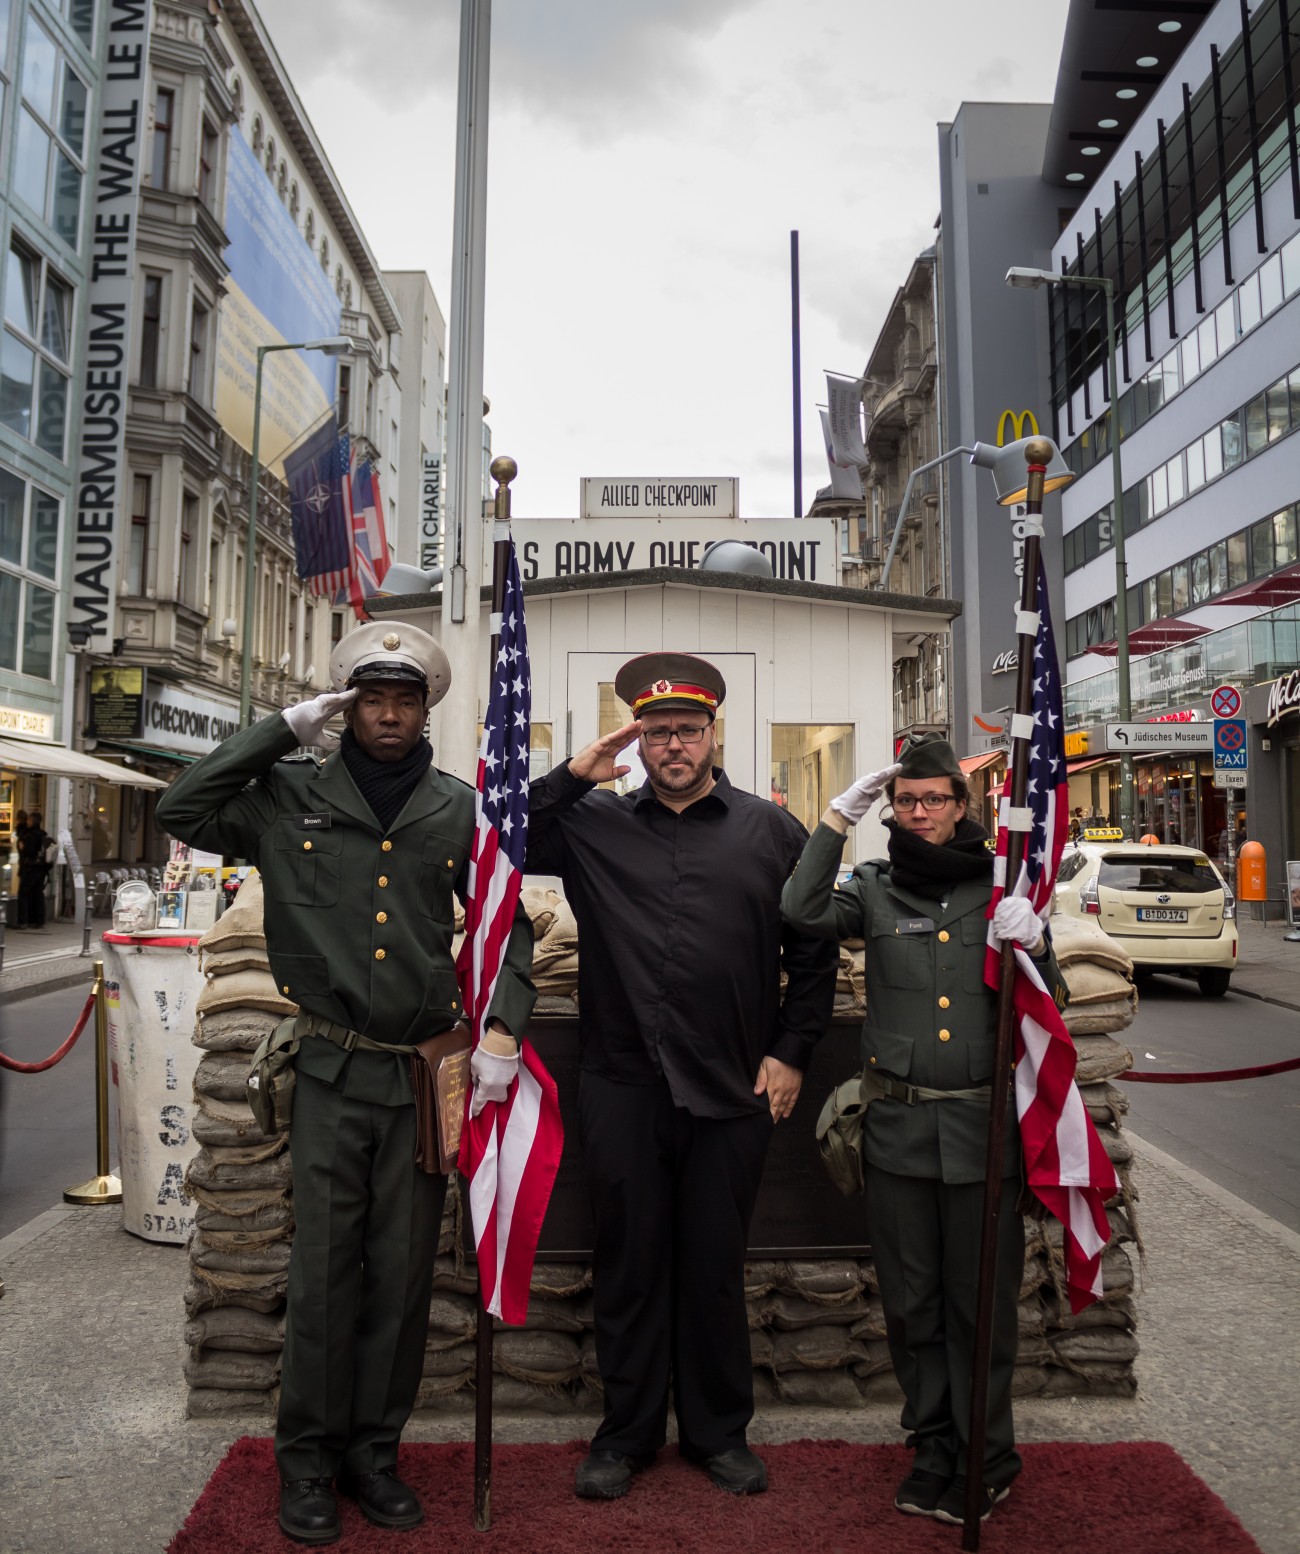 Steve Giasson. Performance invisible n° 114 (Passer à l'Est). Performeurs : Steve Giasson et deux performeurs anonymes. Crédit photographique : Martin Vinette. Checkpoint Charlie, Berlin. 14 mai 2016.